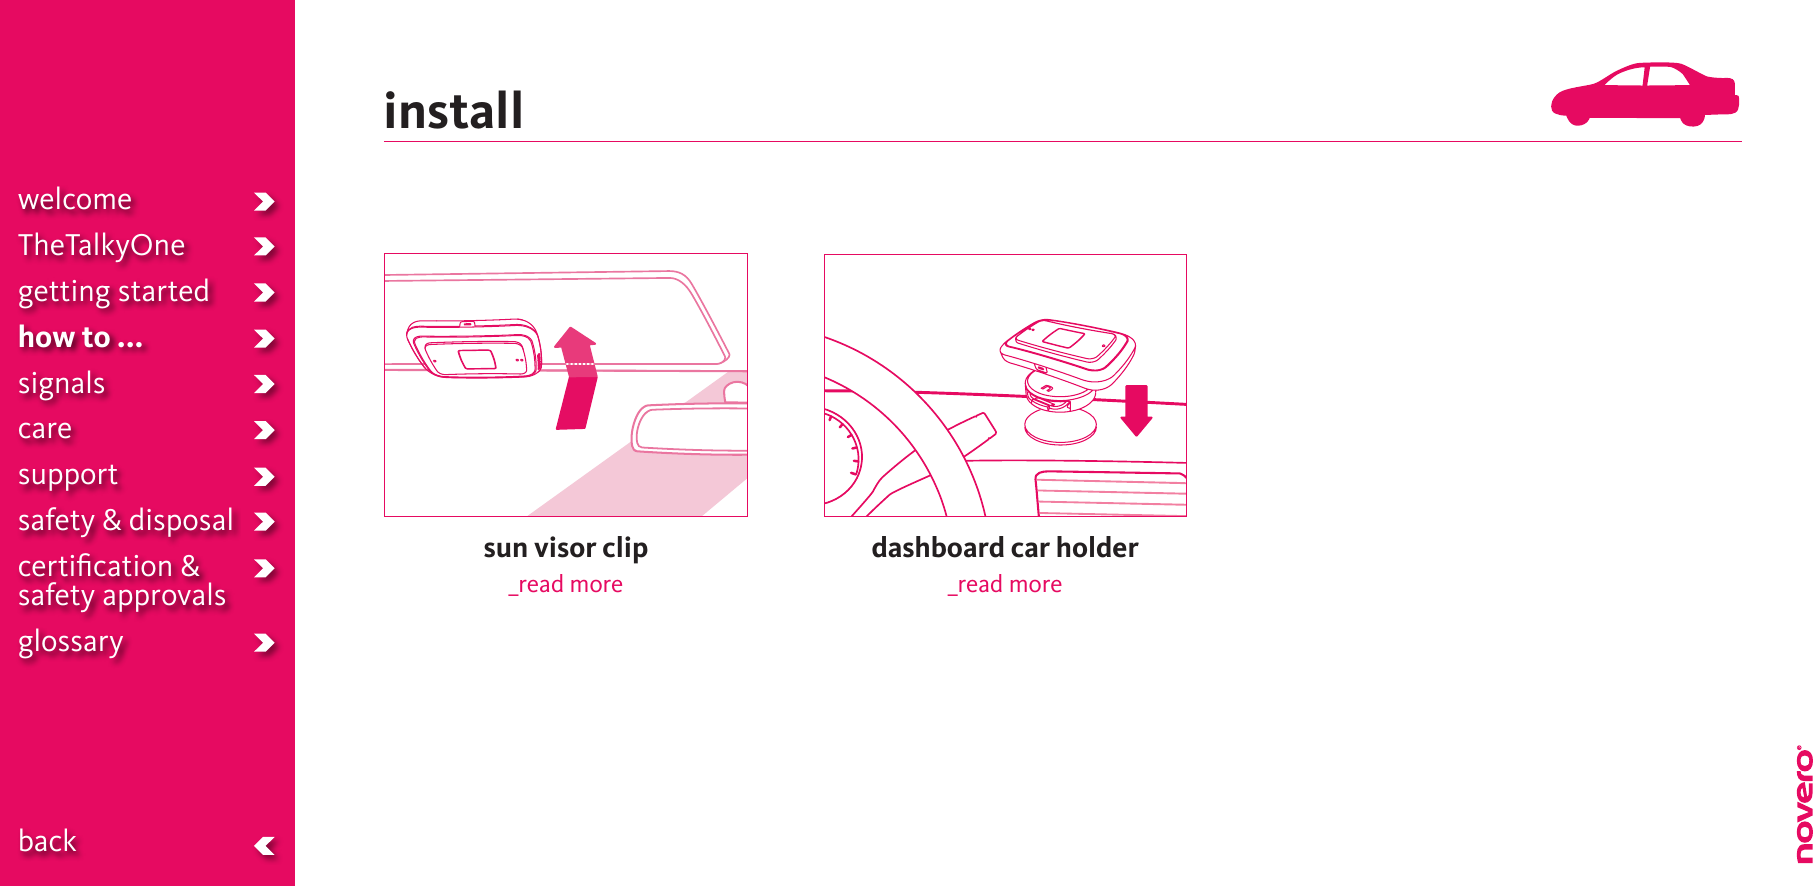 installsun visor clip_read moredashboard car holder_read morewelcomeTheTalkyOnegetting startedhow to ...signalscaresupportsafety &amp; disposalcertiﬁcation &amp;  safety approvals glossary  back